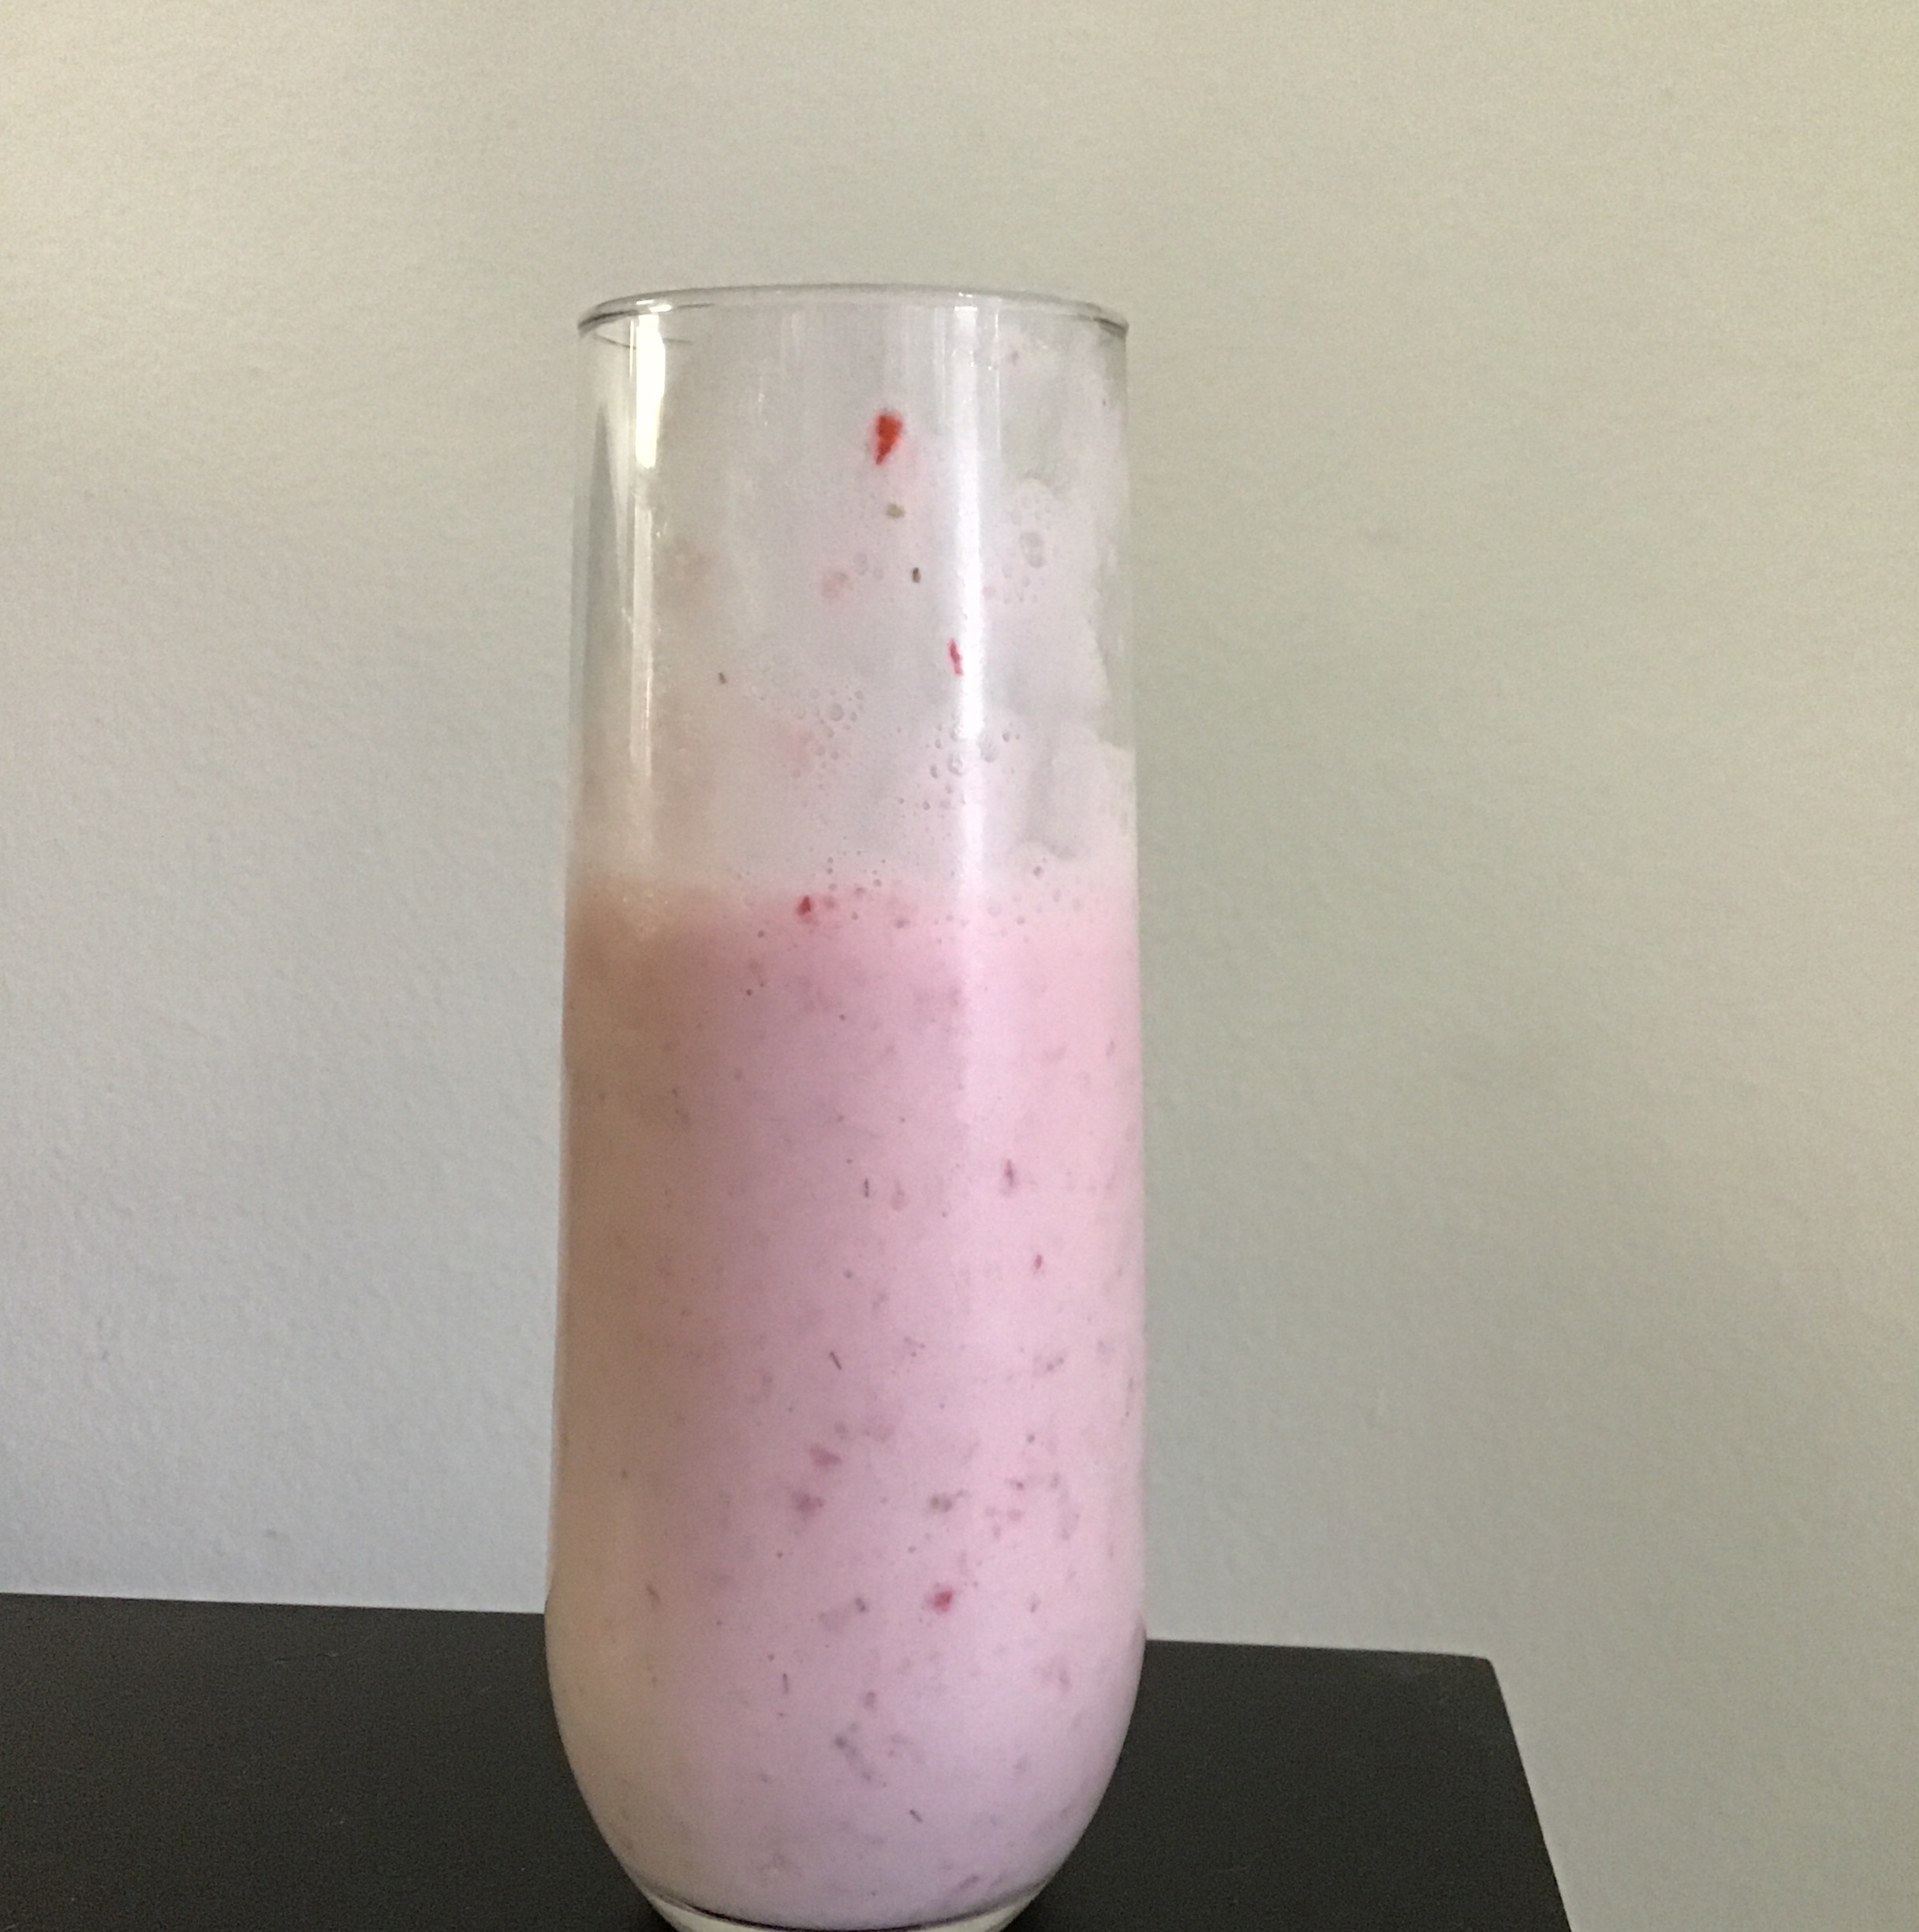 B and L's Strawberry Smoothie 